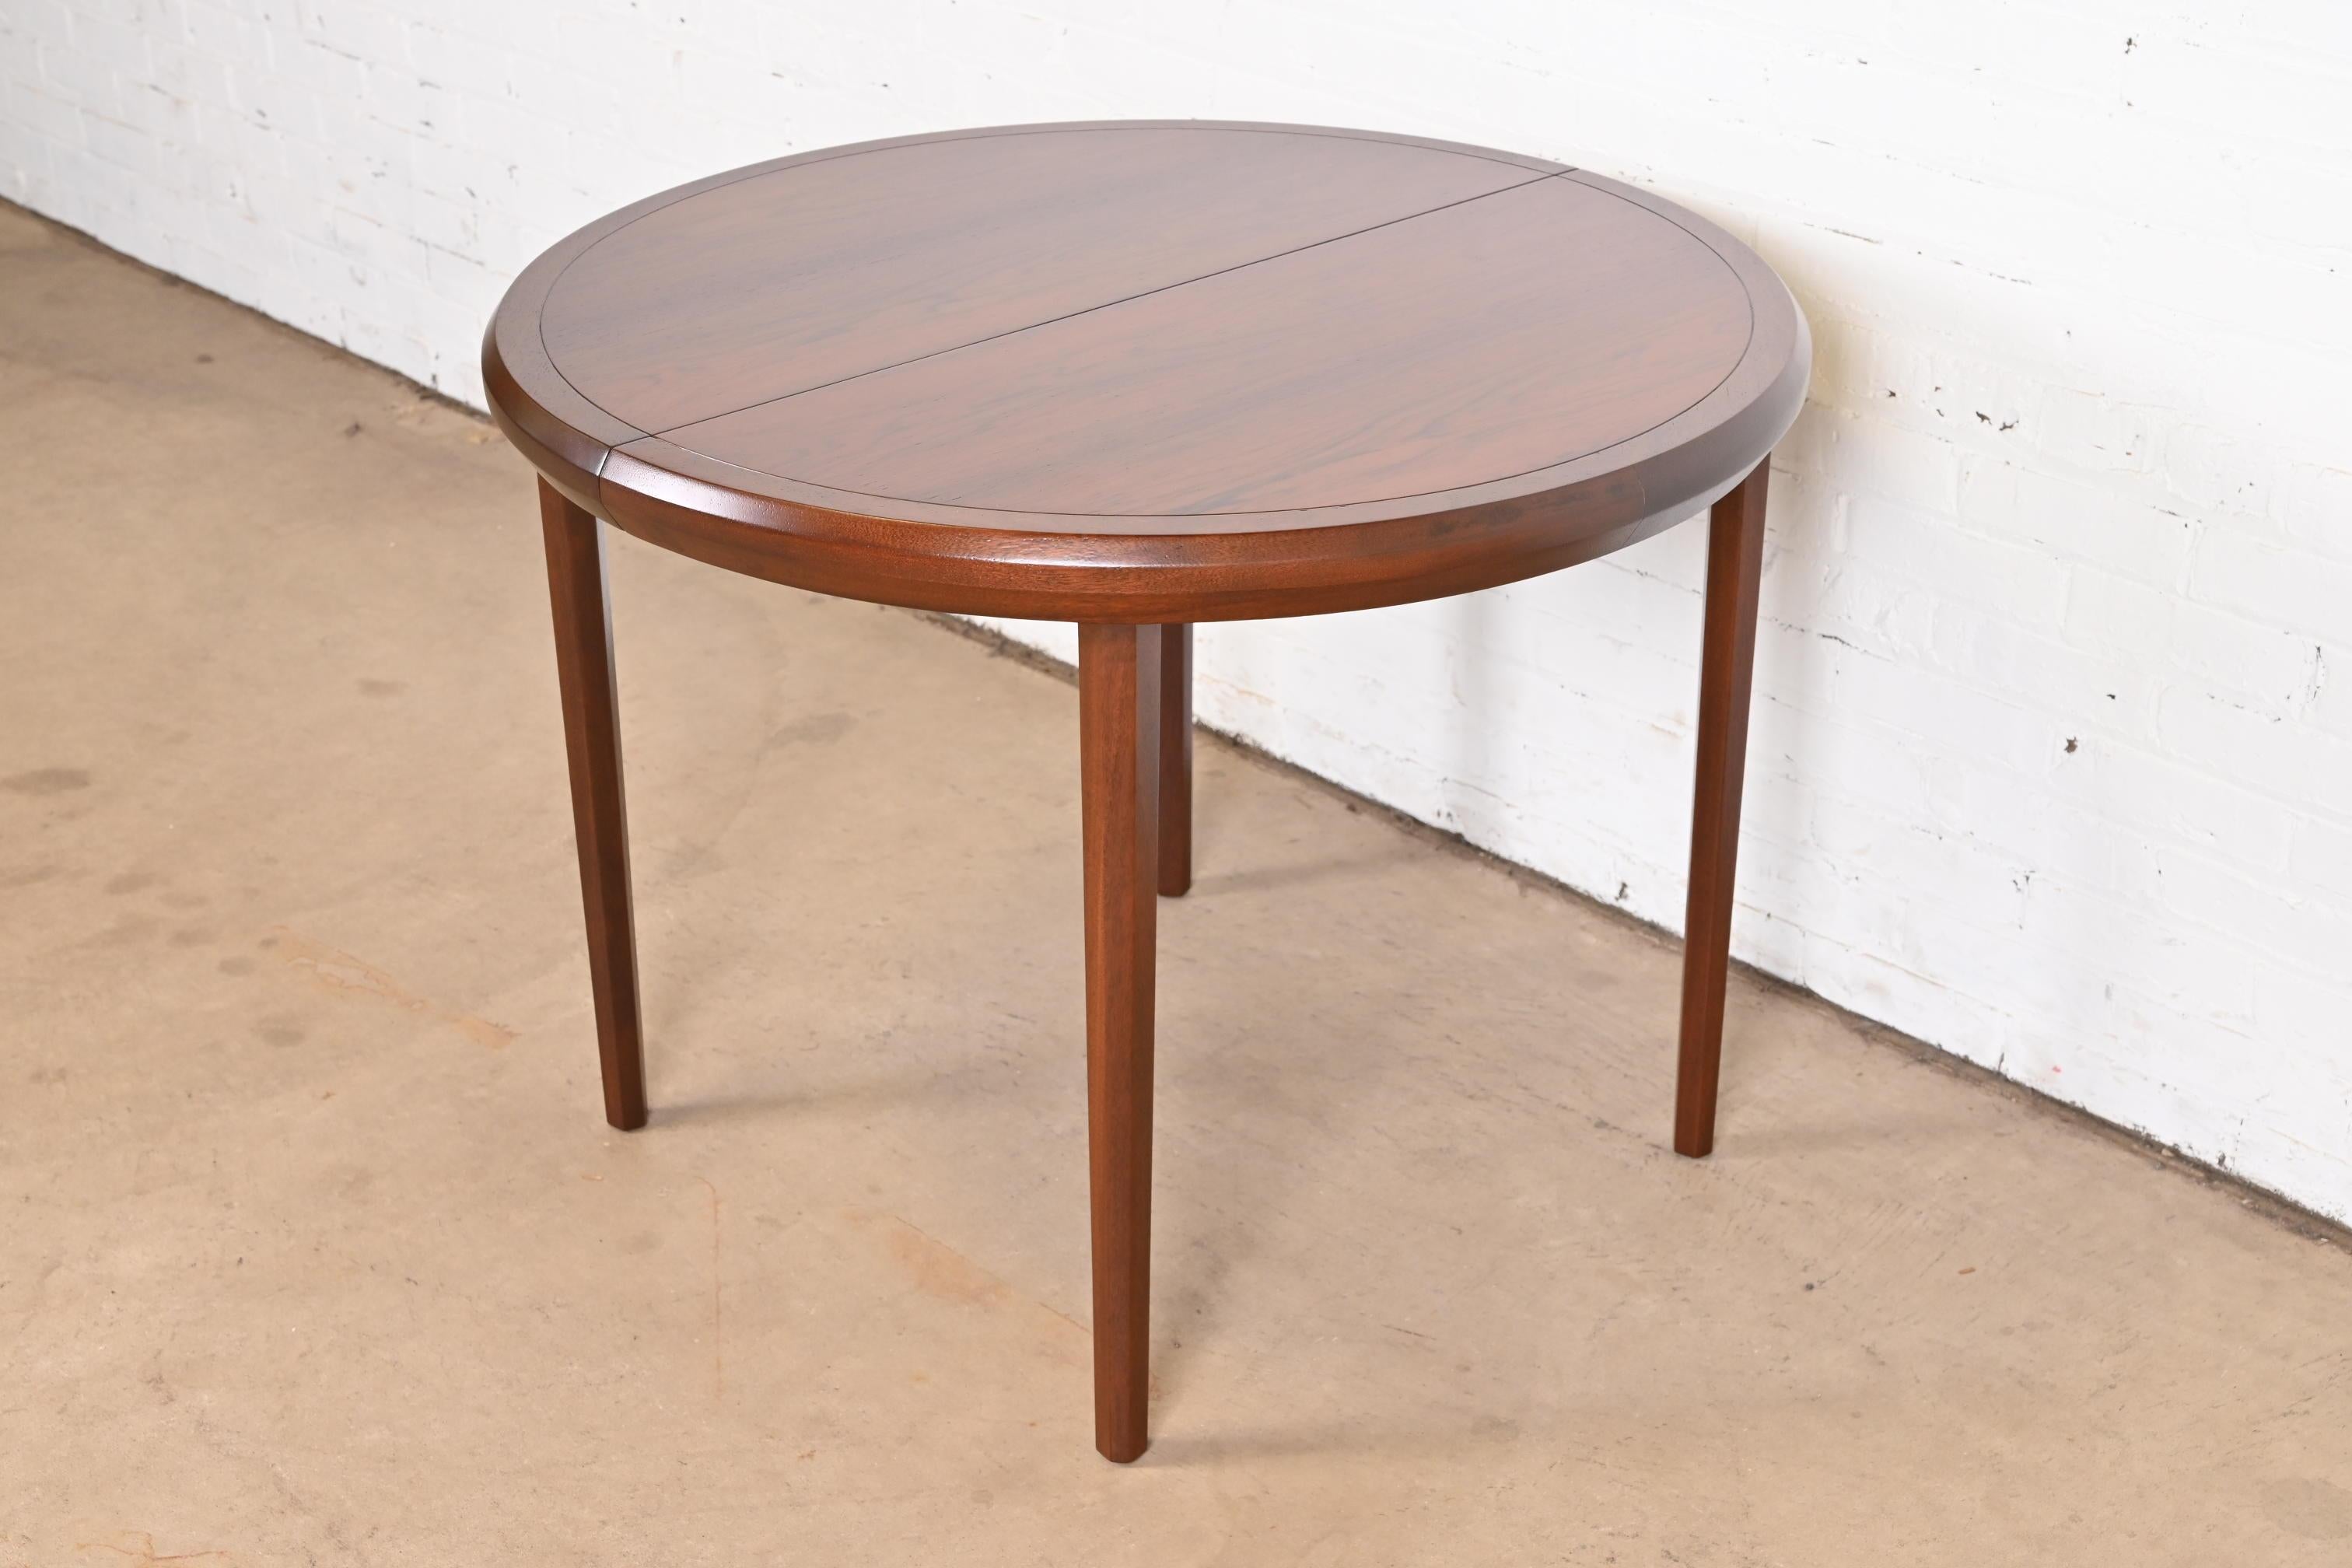 Harvey Probber Mid-Century Modern Rosewood Dining Table, Newly Refinished For Sale 6